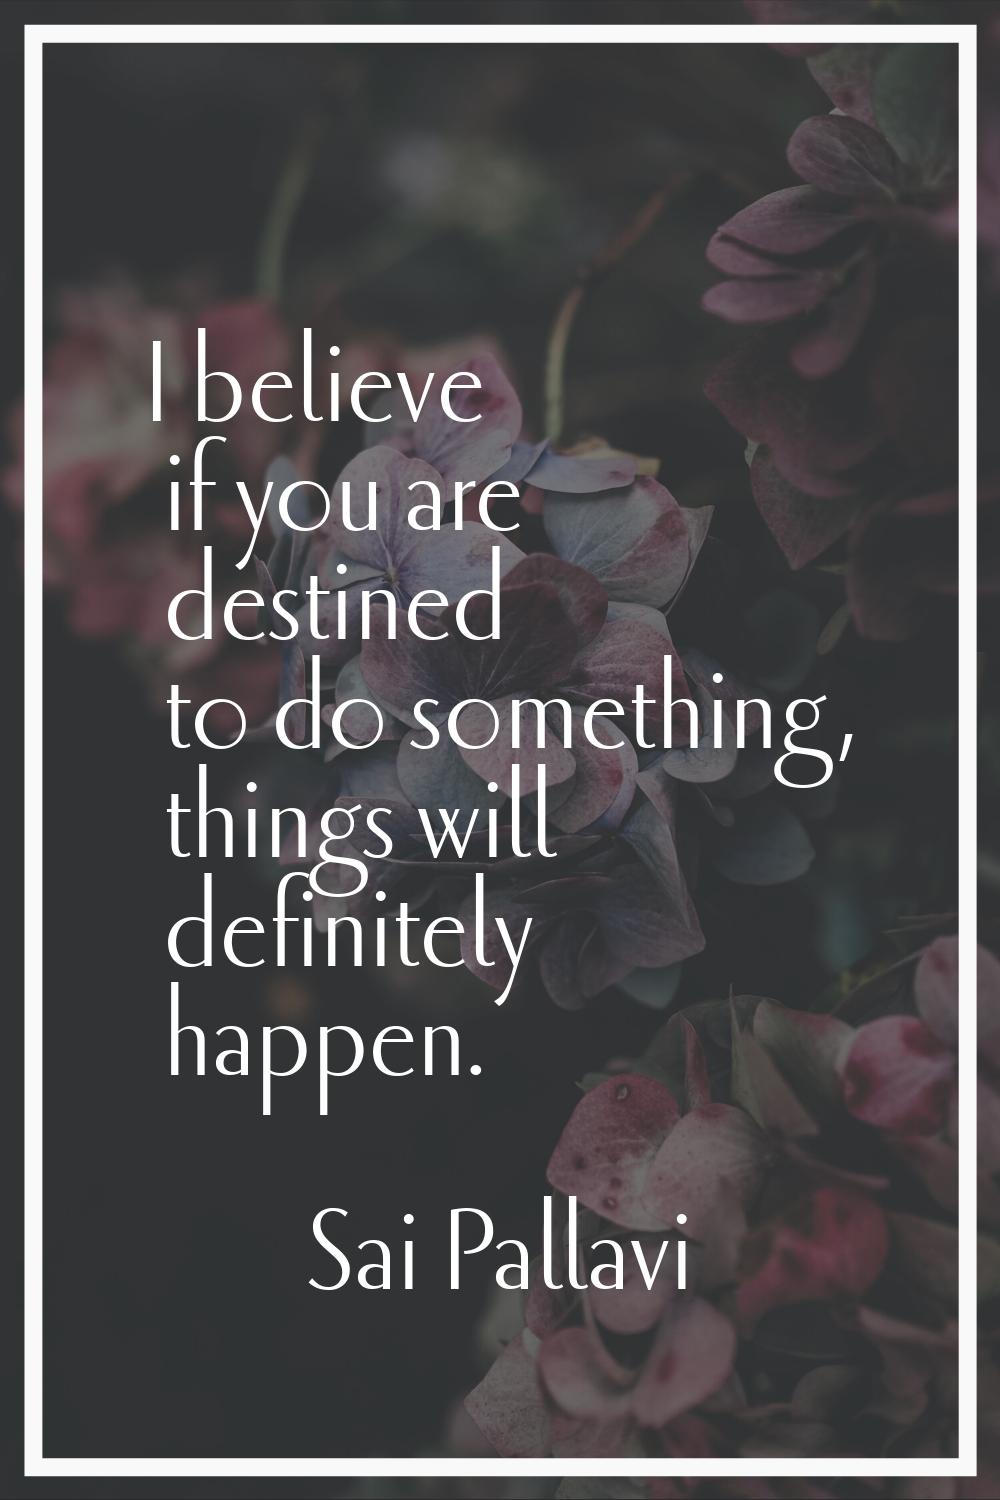 I believe if you are destined to do something, things will definitely happen.